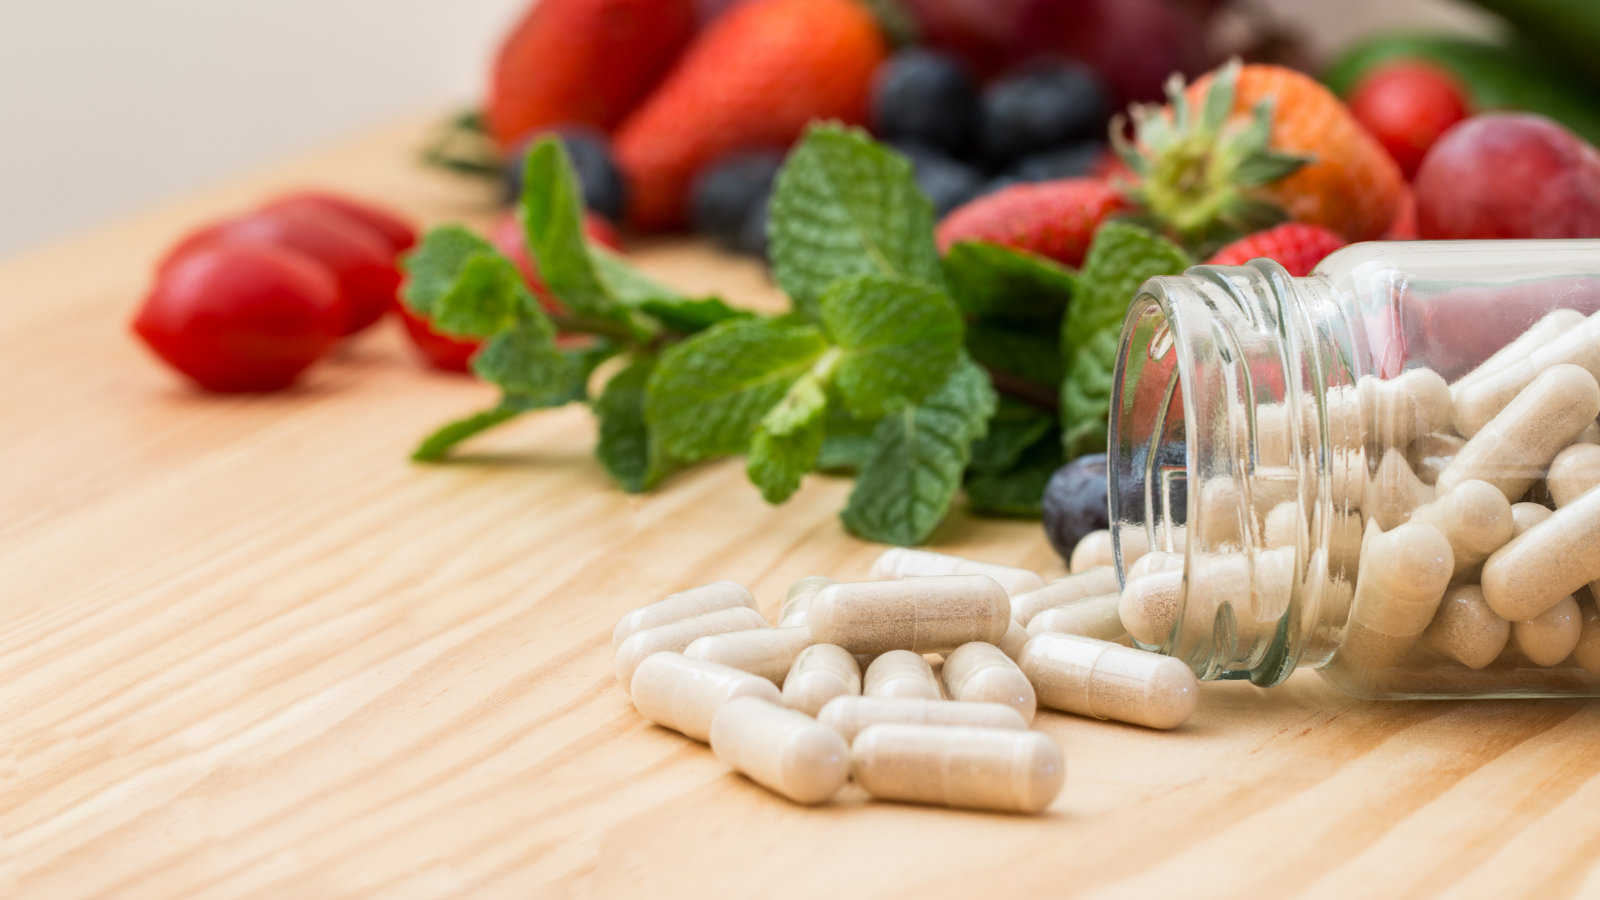 Joint health: A guide to nutritional supplements, diet and body composition